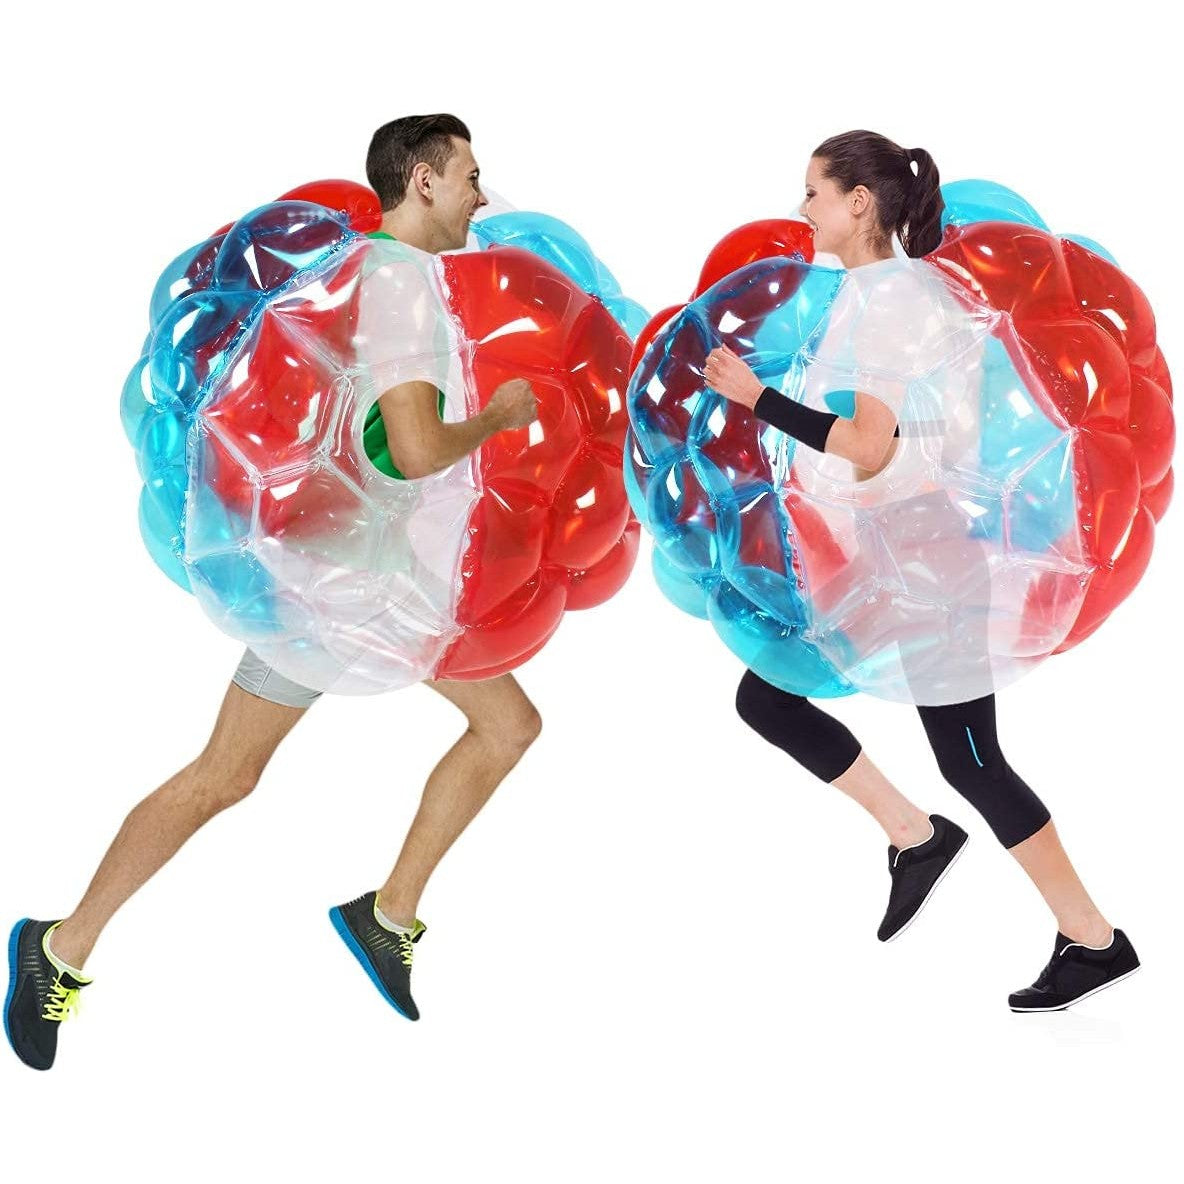 Two adults in colorful giant inflatable bubble balls bouncing into each other.